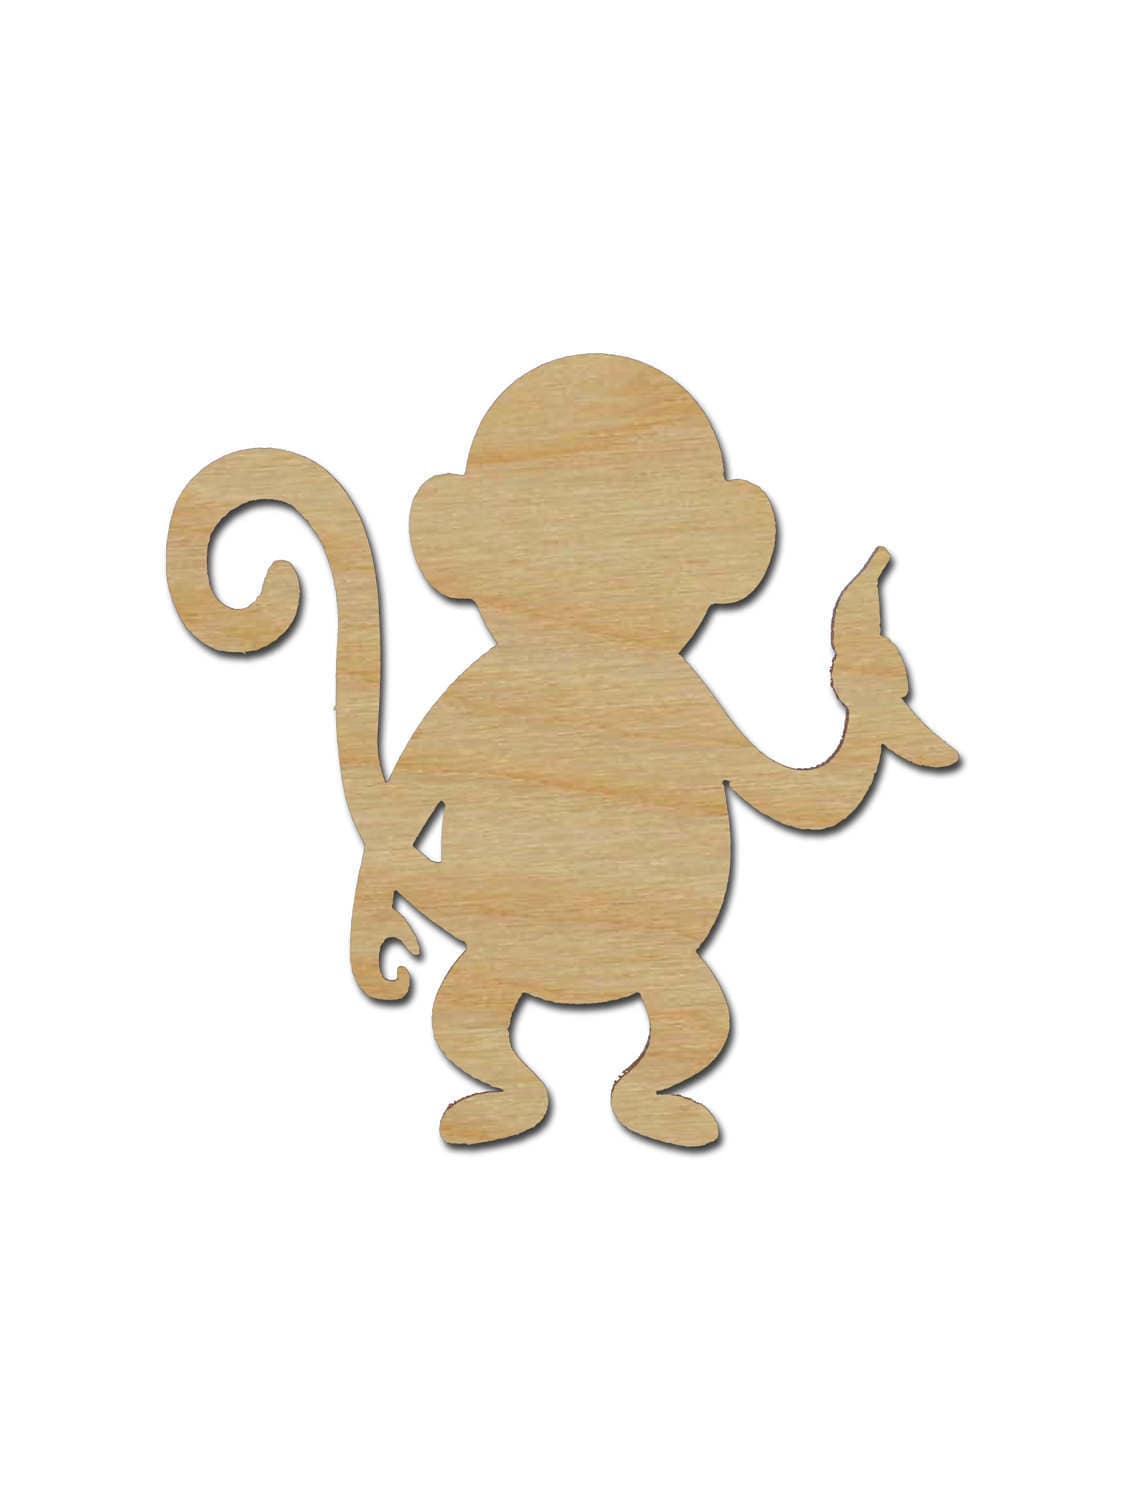 Bee Shape Unfinished Wood Craft Cutouts Variety of Sizes Style #03 Artistic Craft Supply